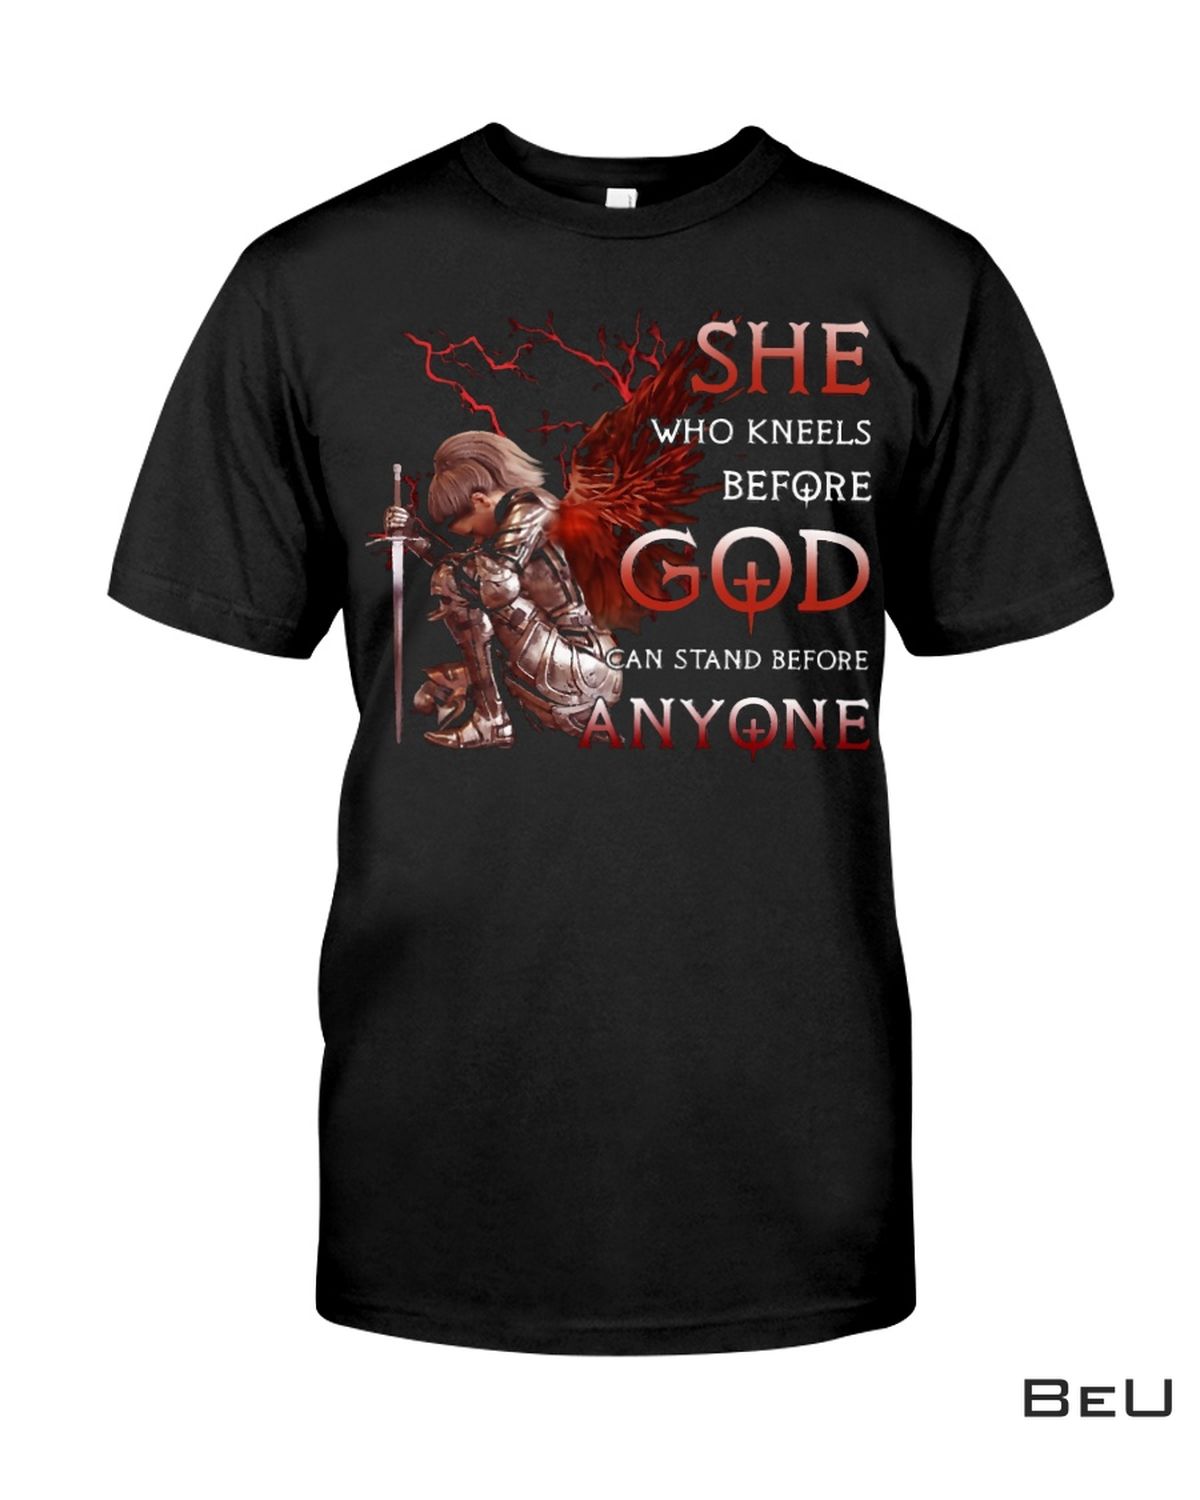 Kneels Before God And Stand Before Anyone Shirt